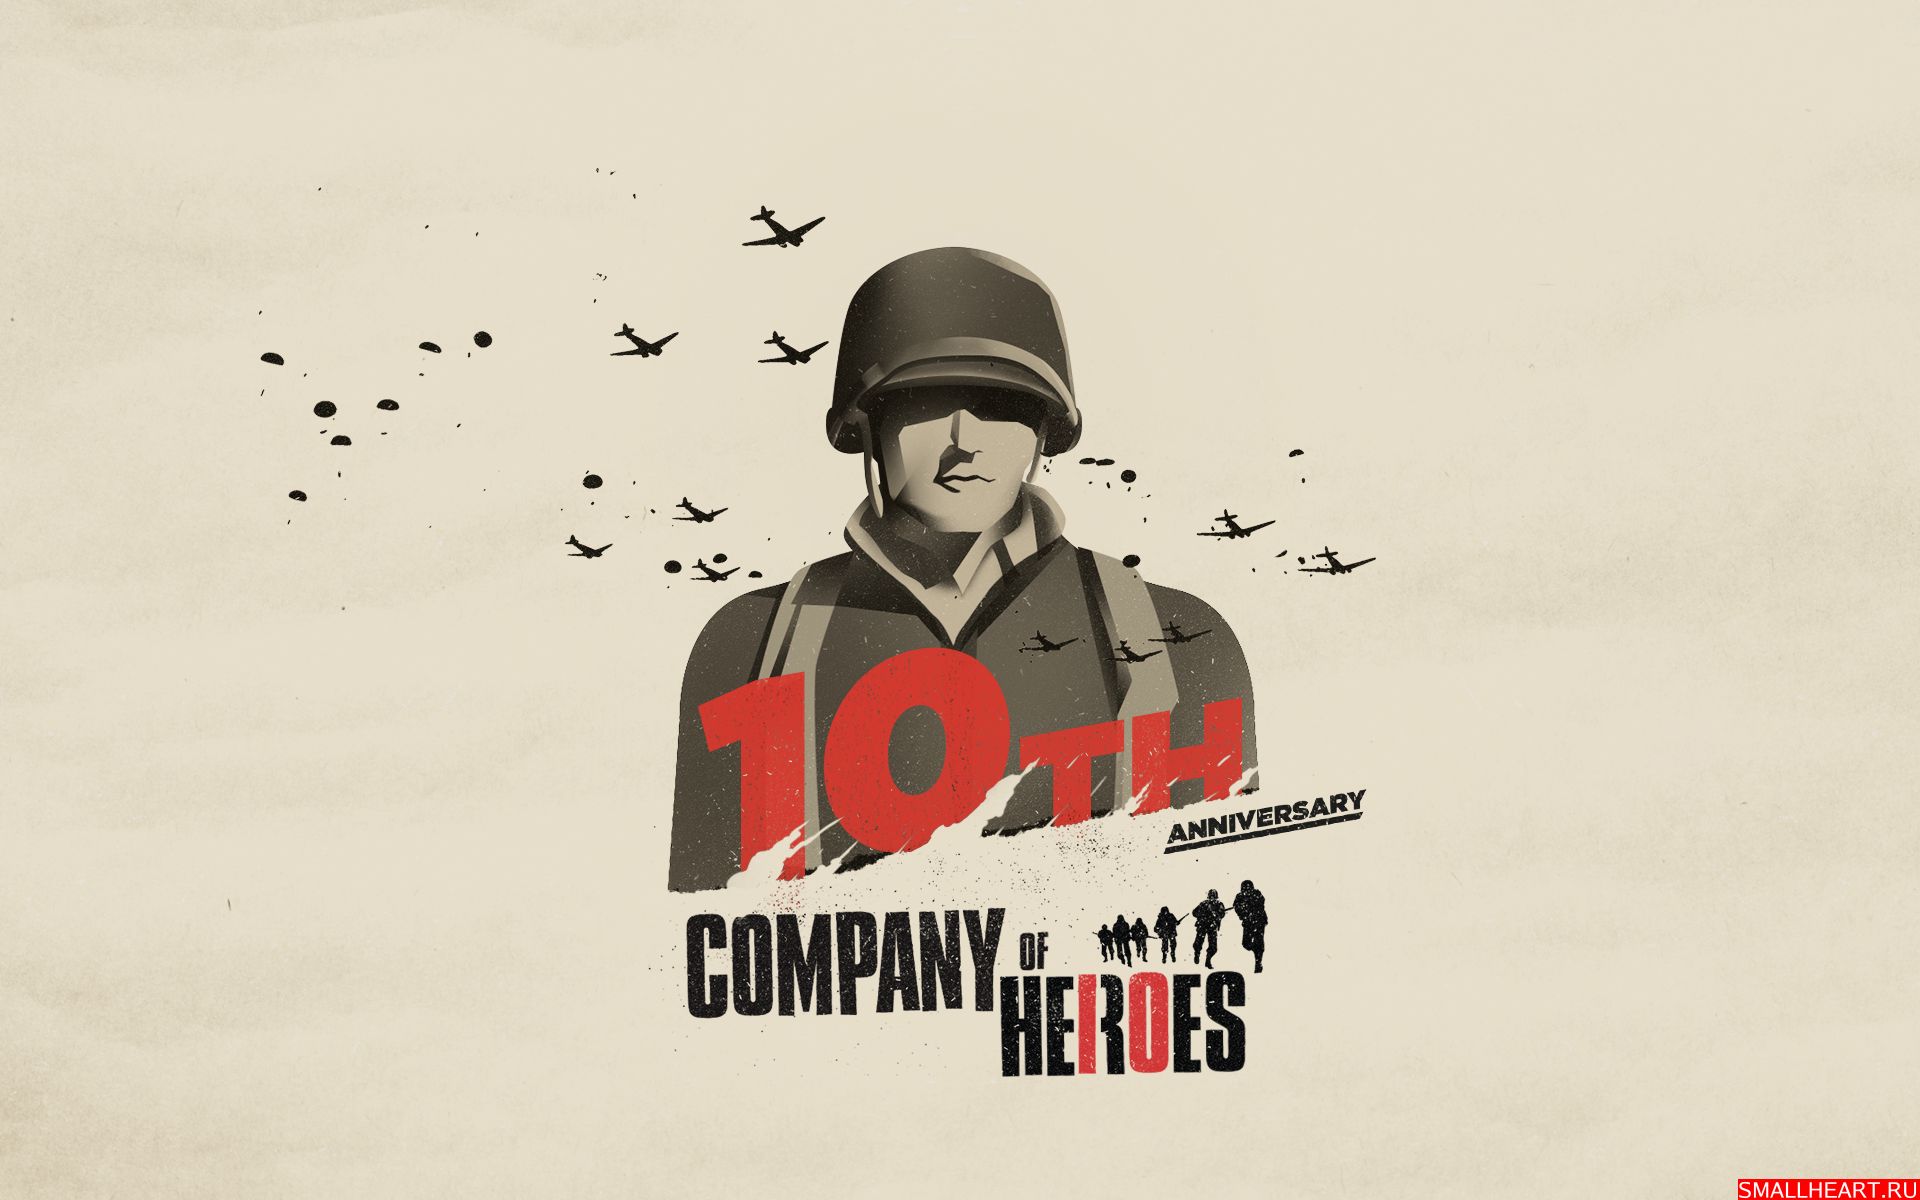 Company of Heroes 10th anniversary(FINISHED) news.